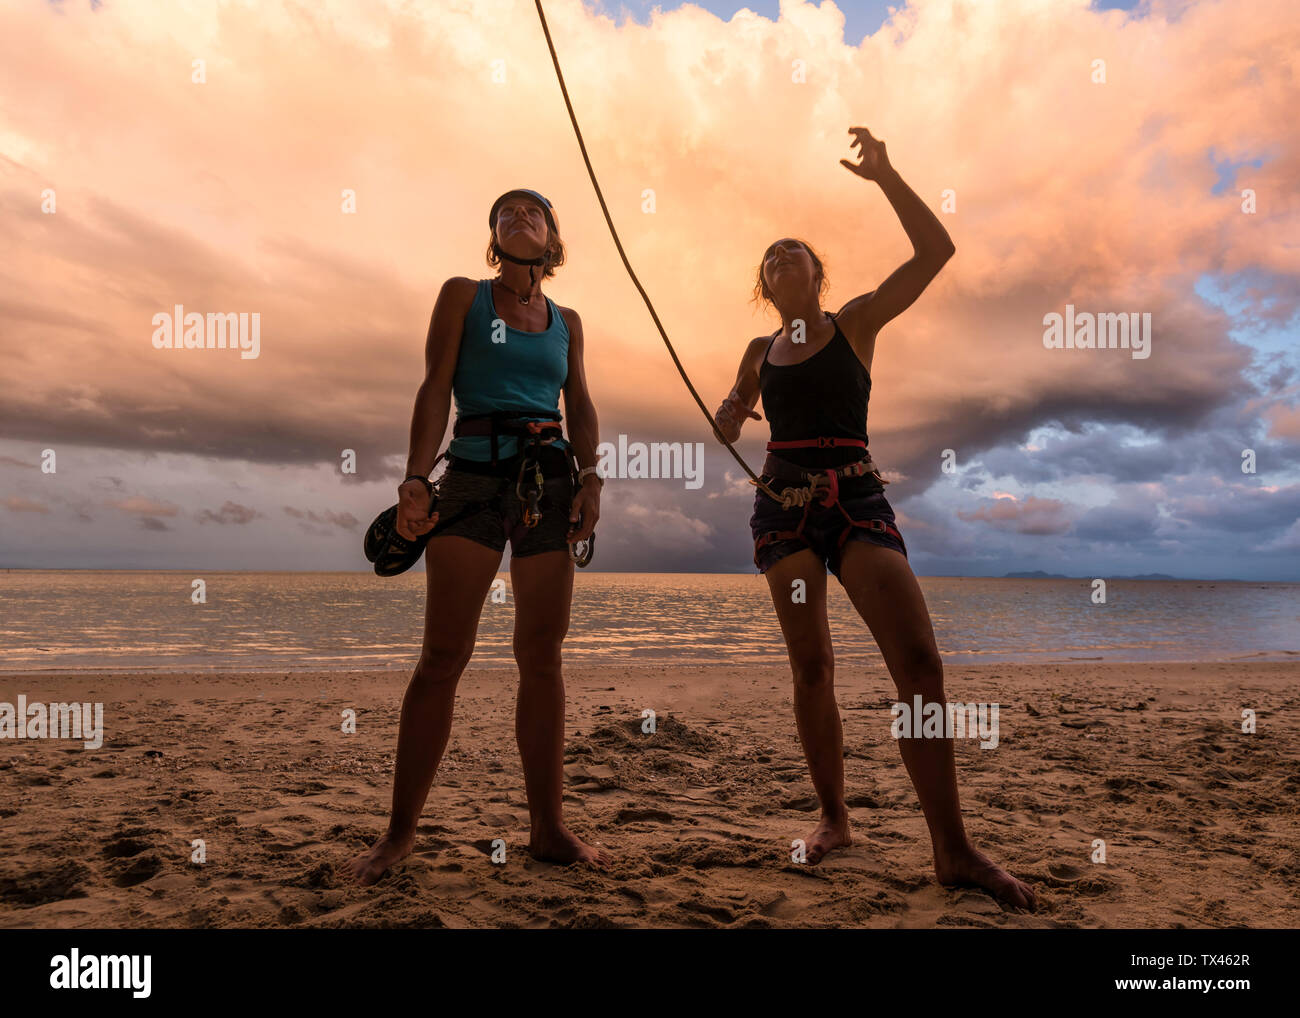 Thailand, Krabi, Lao Liang island, two female climbers discussing on the beach Stock Photo